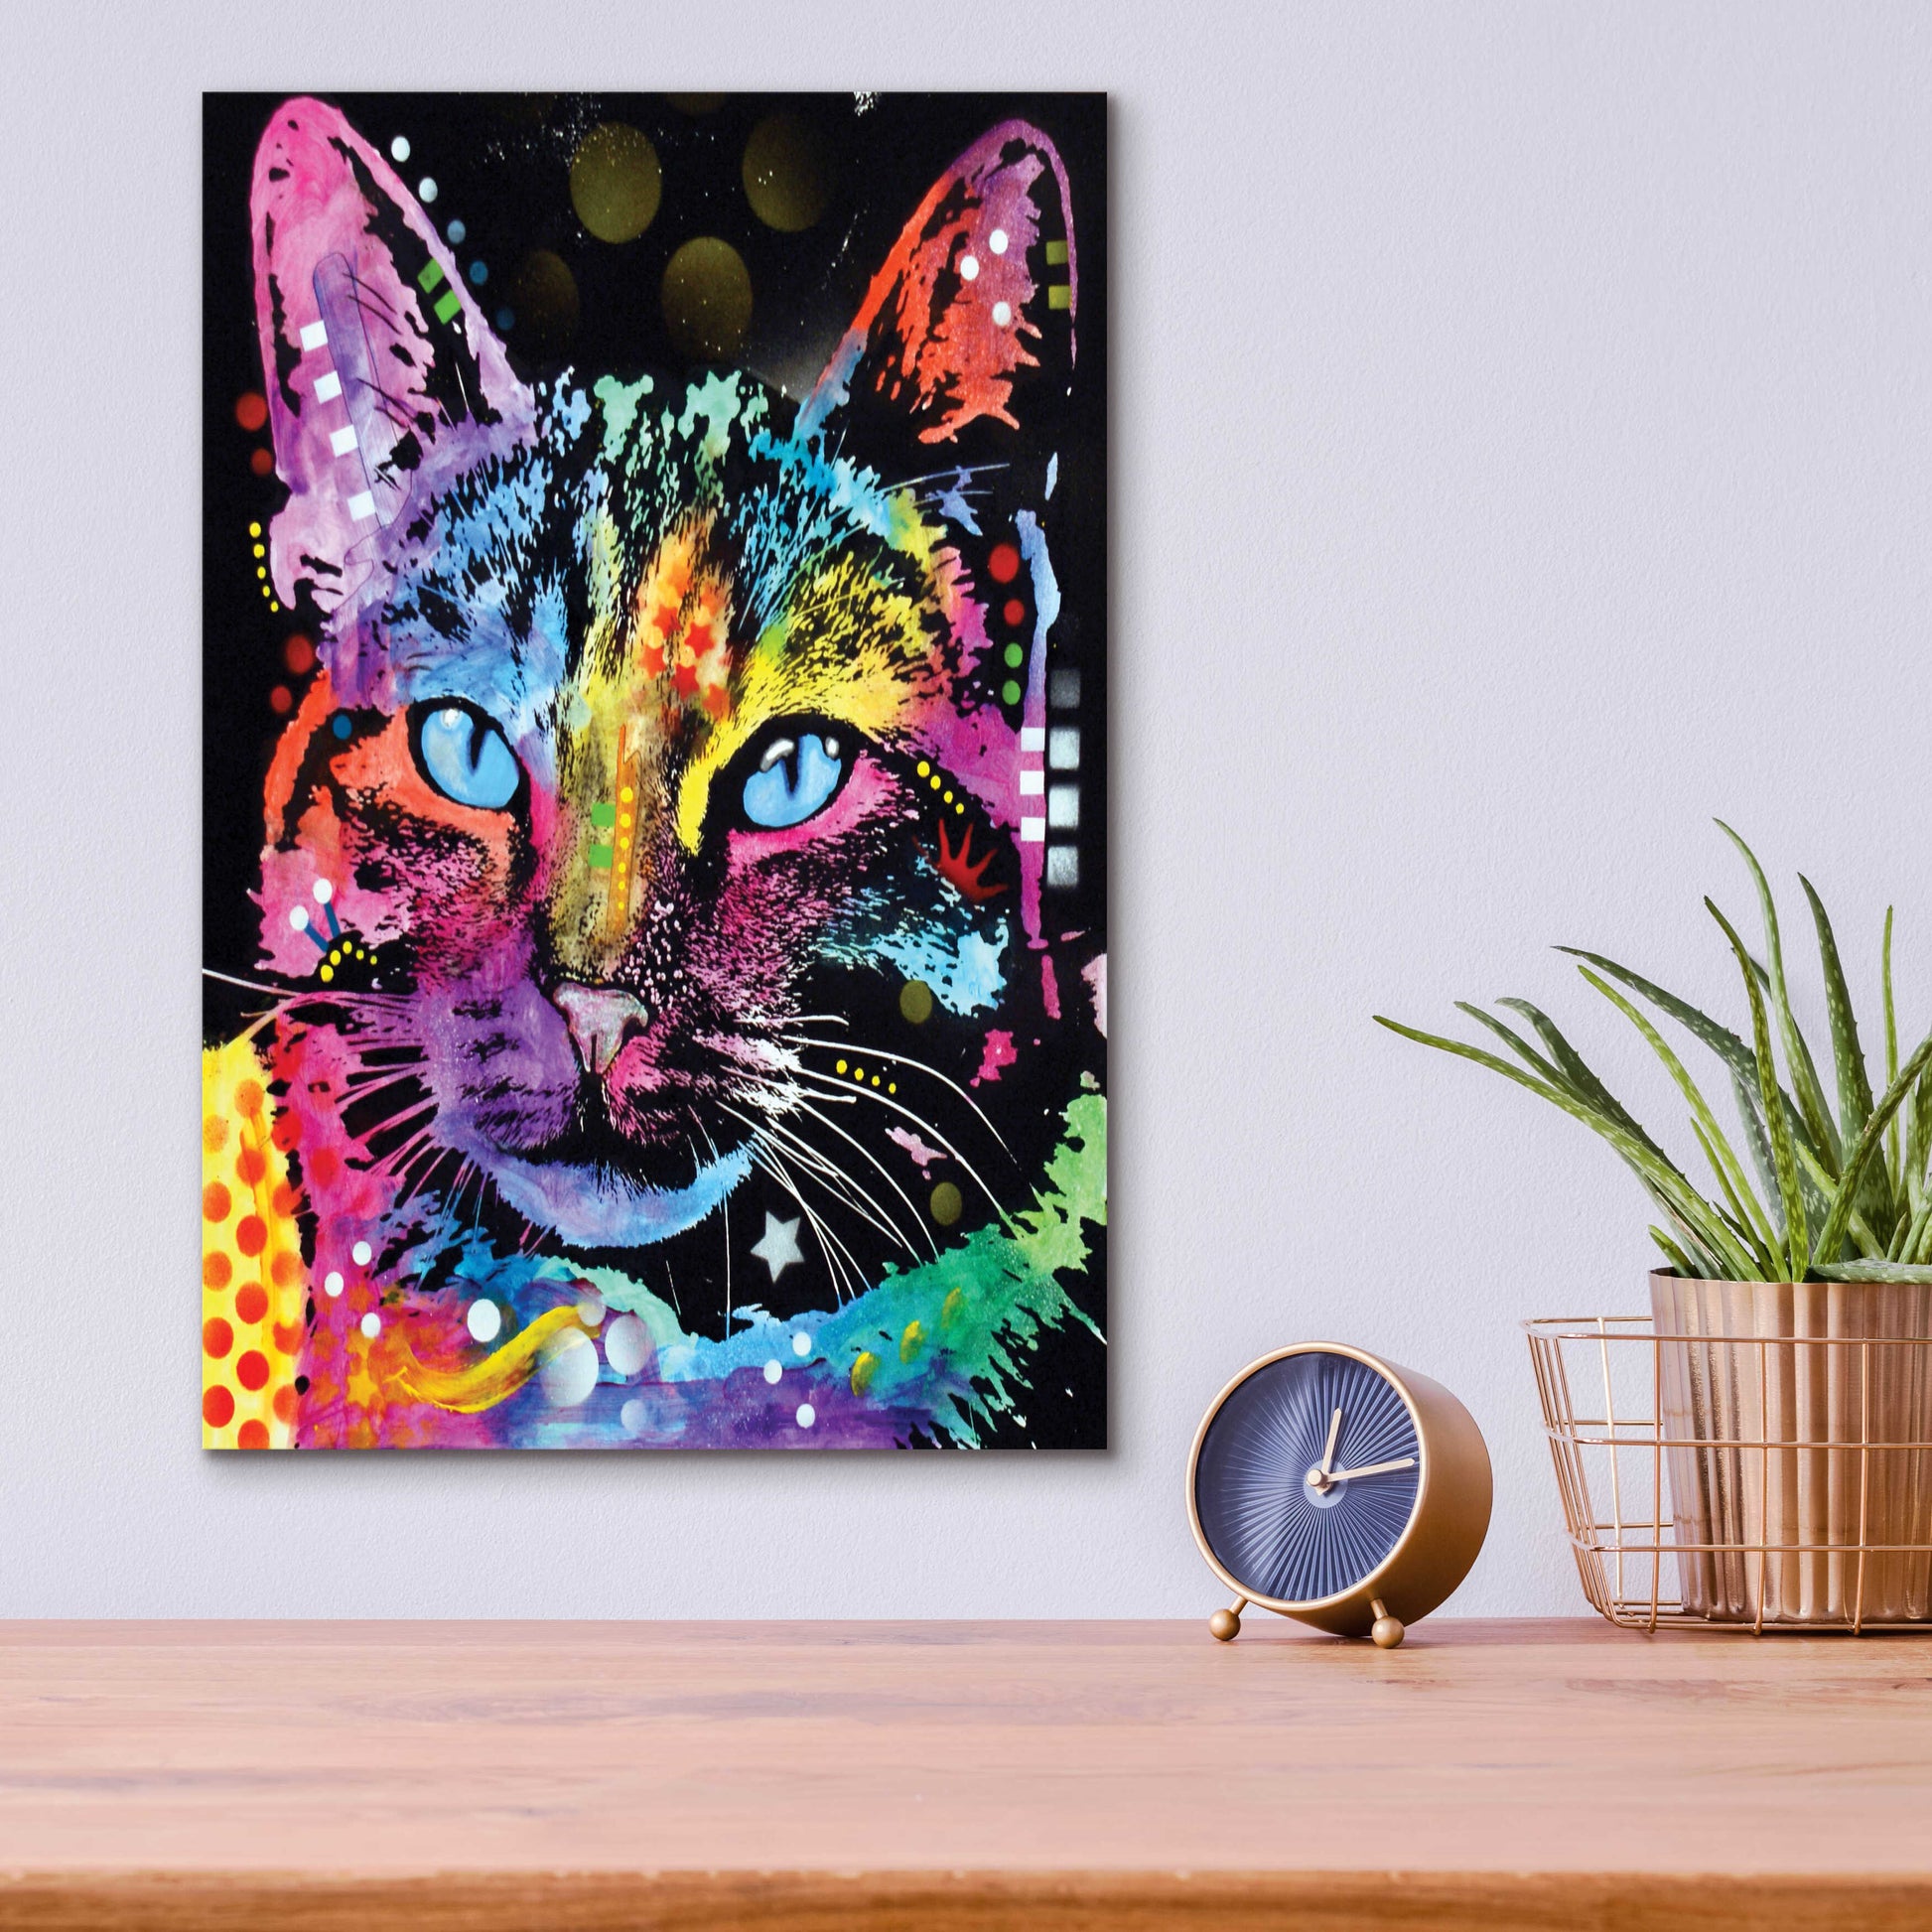 Epic Art 'Thoughtful Cat' by Dean Russo, Acrylic Glass Wall Art,12x16